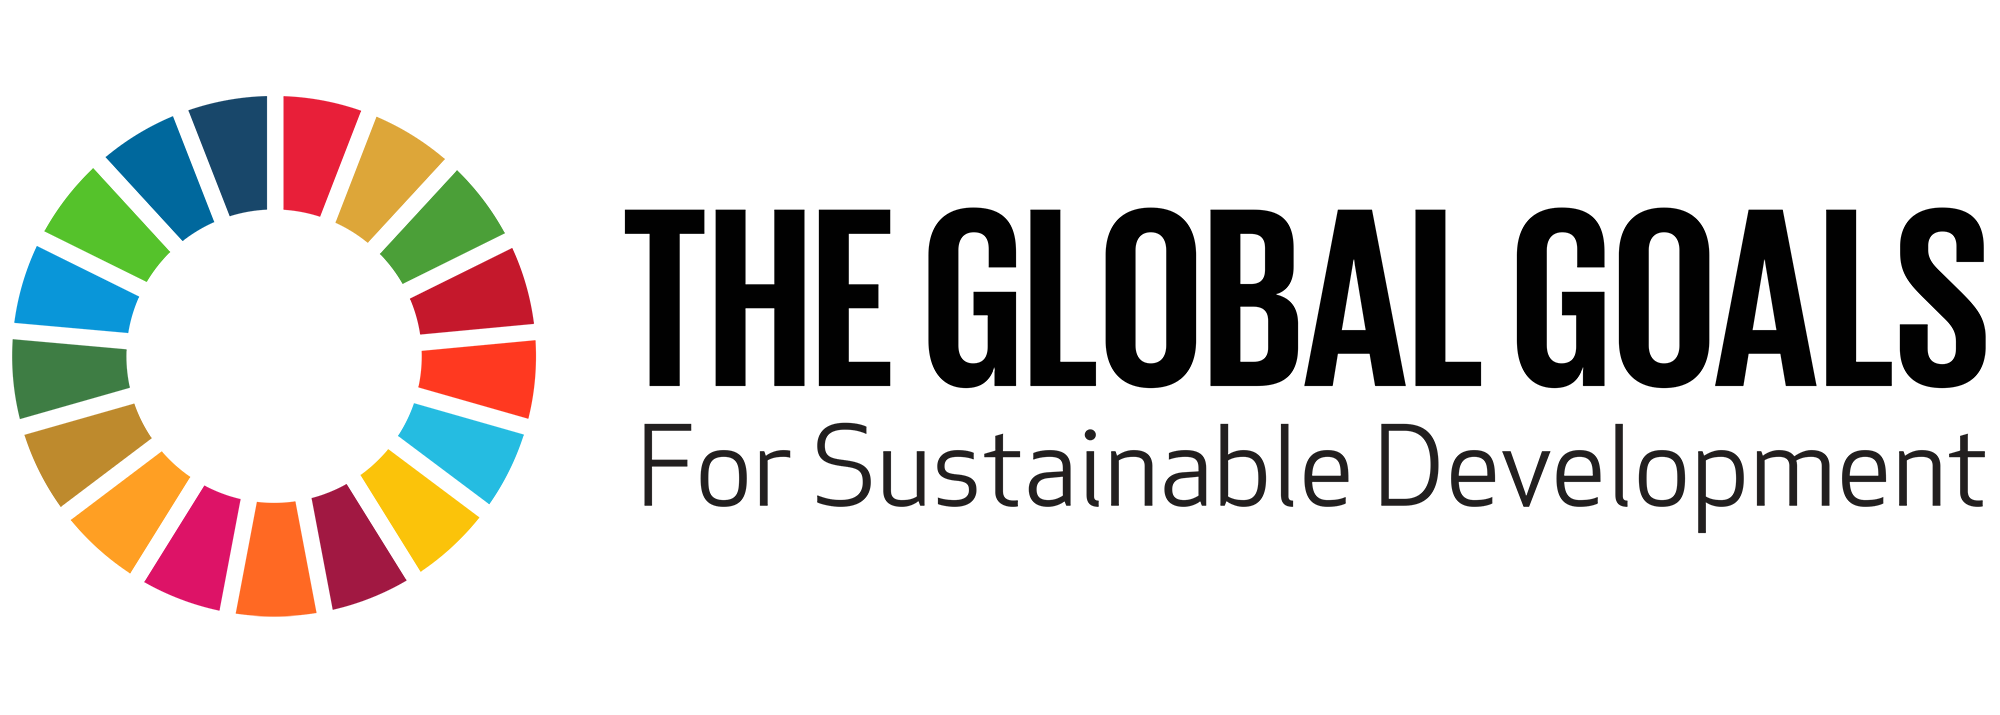 Logo of the global goals for sustainable development.